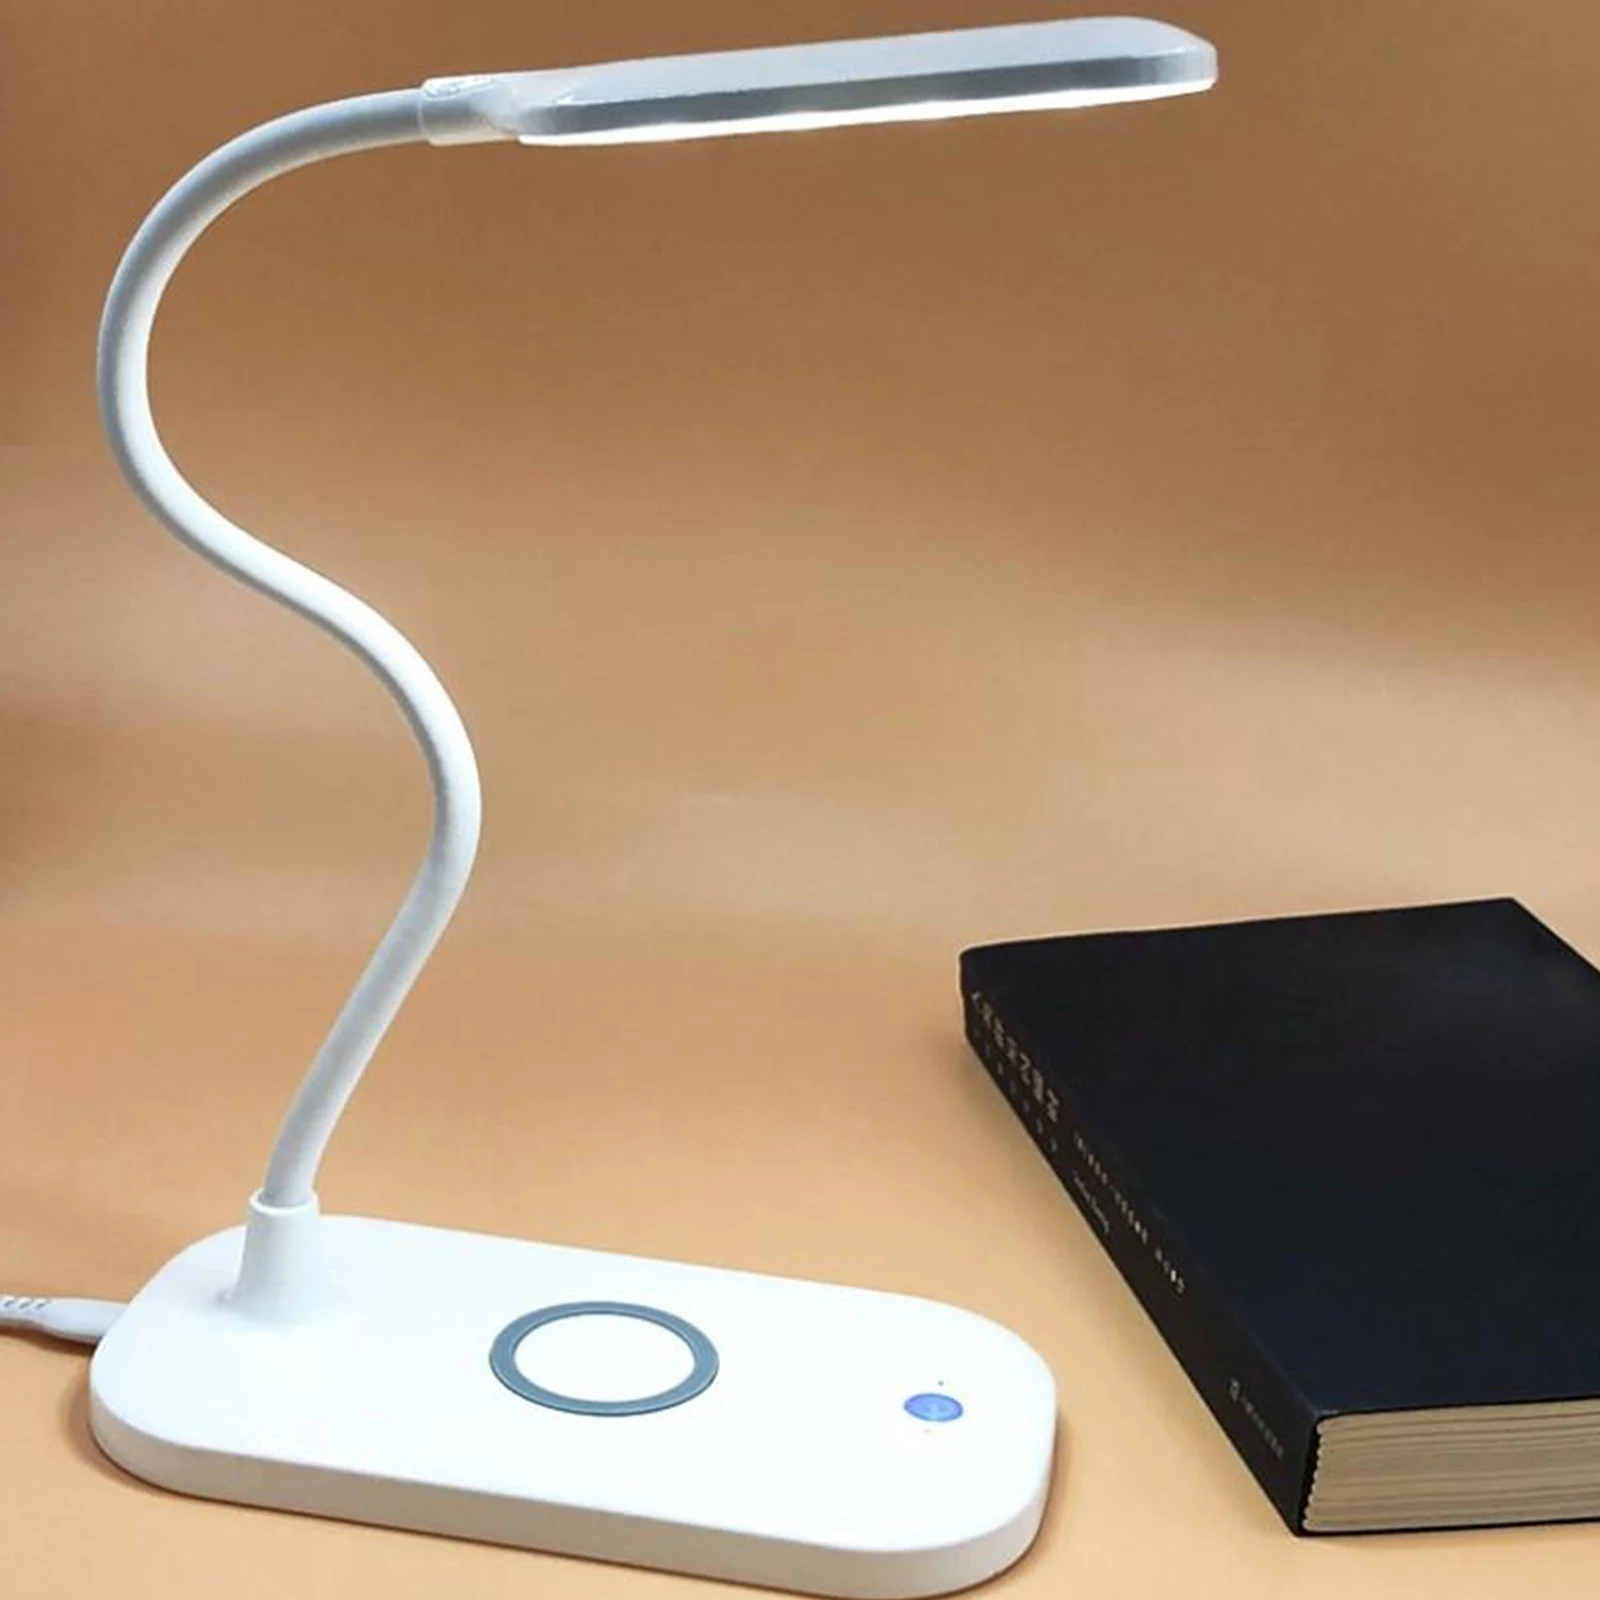 Dimmable LED Desk Lamp Room Reading Light Lamp 10W Wireless Charger